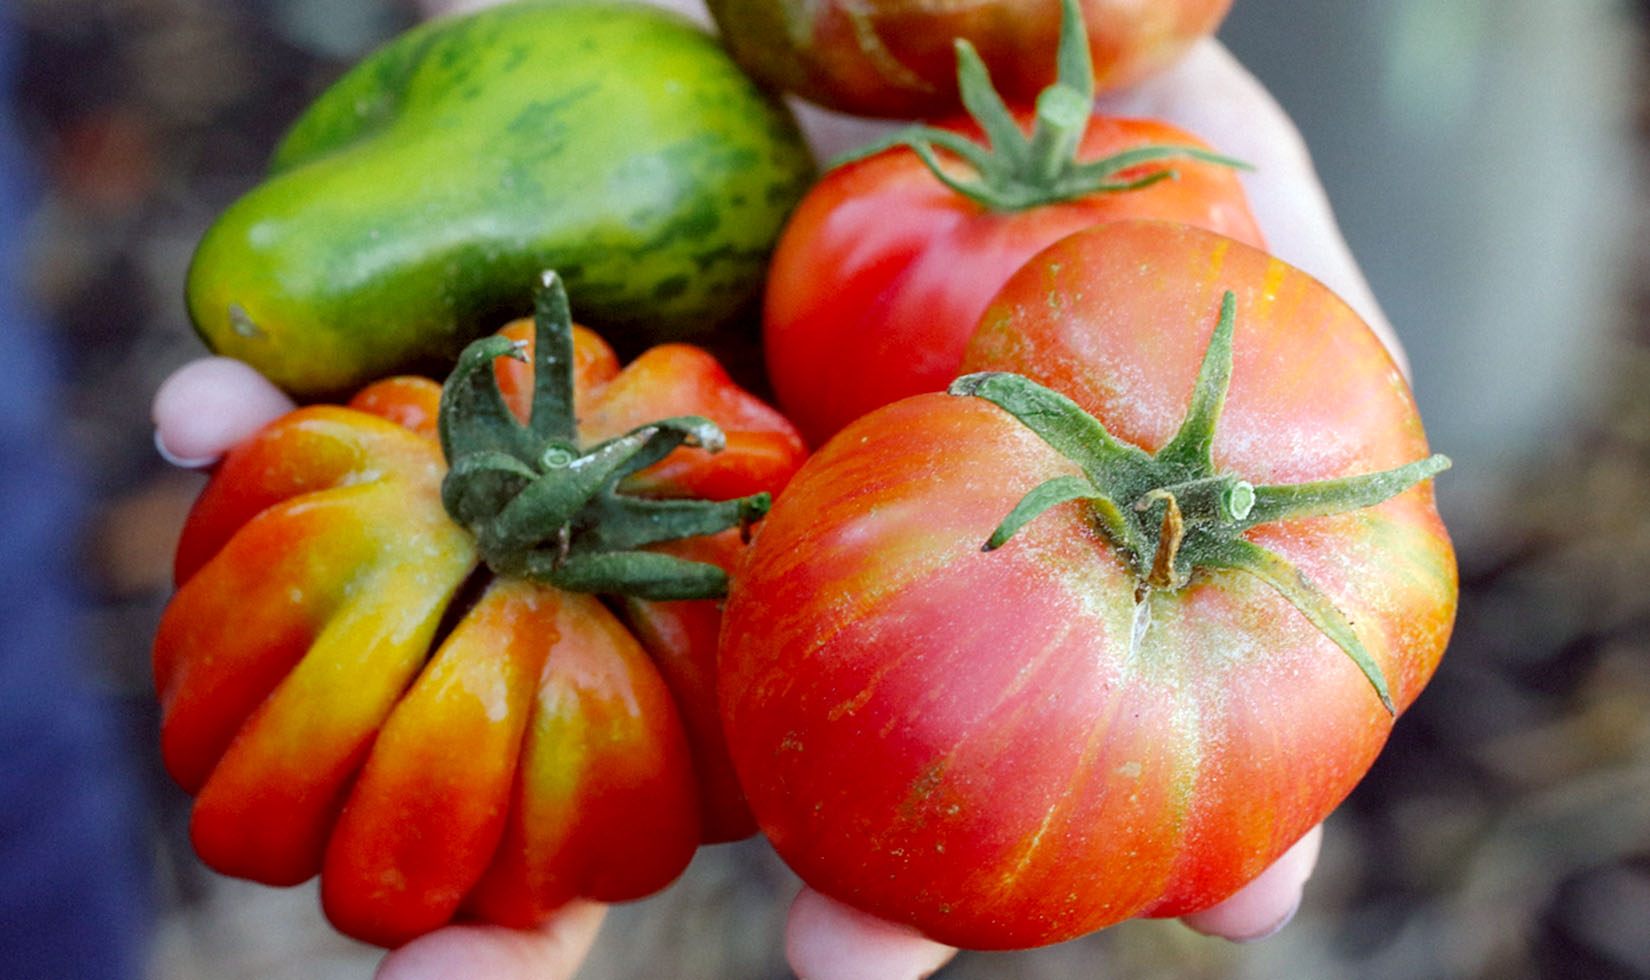 Hands holding four large heirloom tomatoes